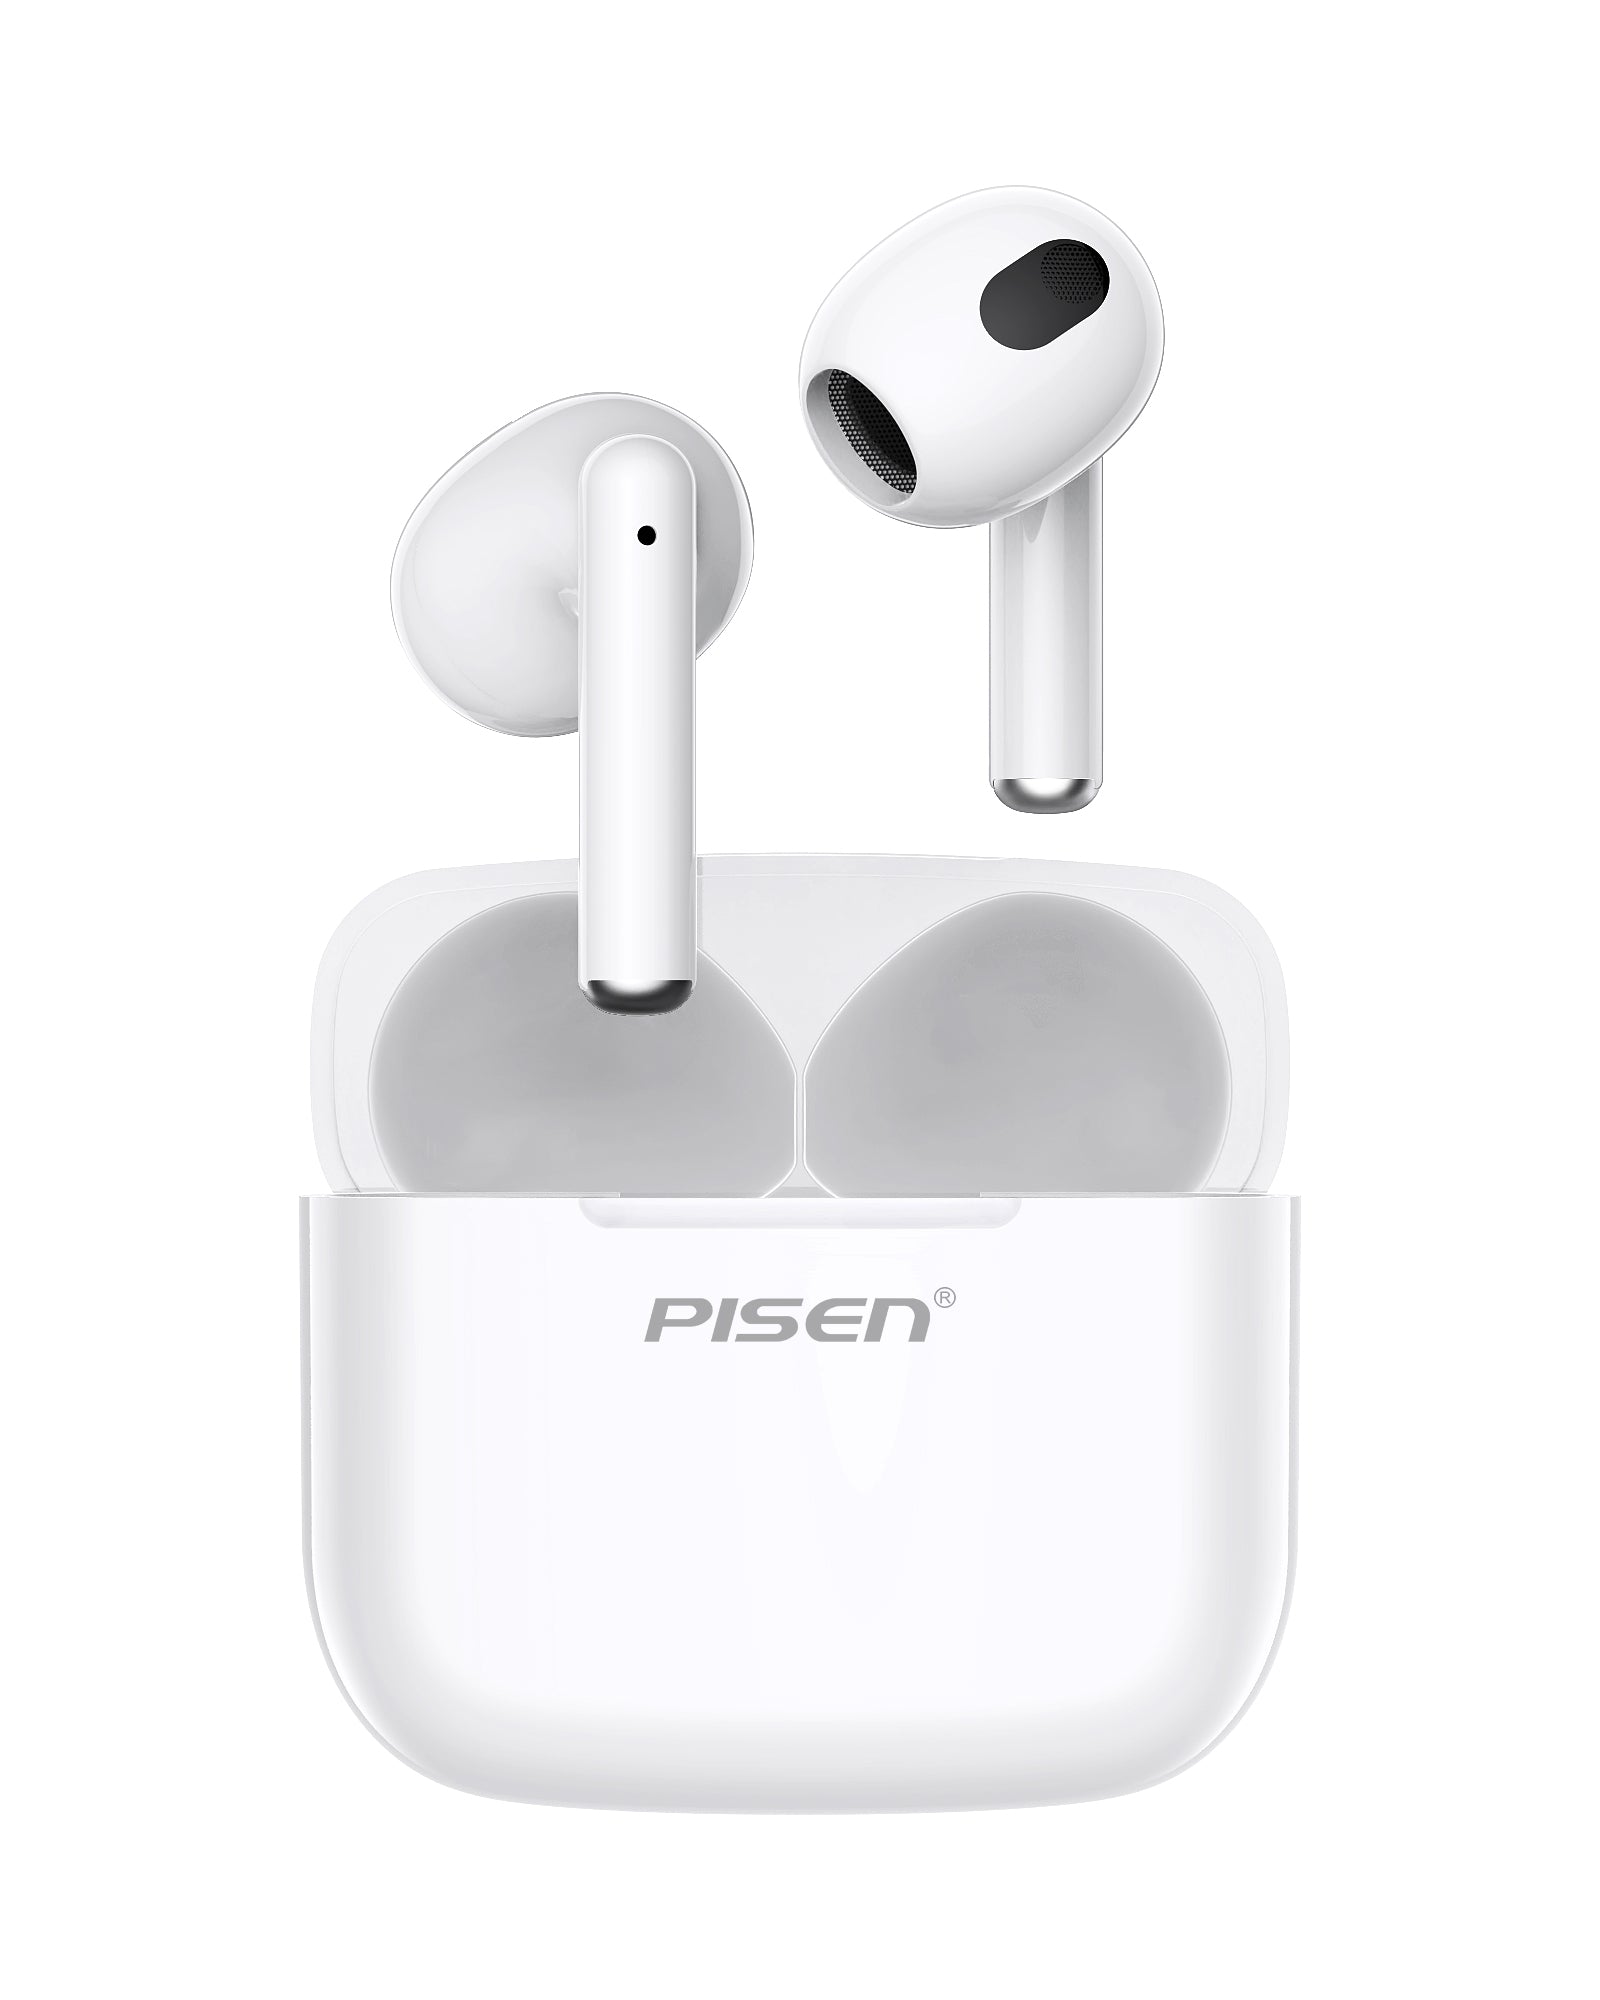 PISEN Wireless Earbuds In-ear Headphones - P1 Bluetooth 5.3 Deep Bass Hi-Fi Stereo Ear buds with Mic In-ear Call Noise Canceling, IPX5 Waterproof Earphones for Android iOS phone TV Laptop, White